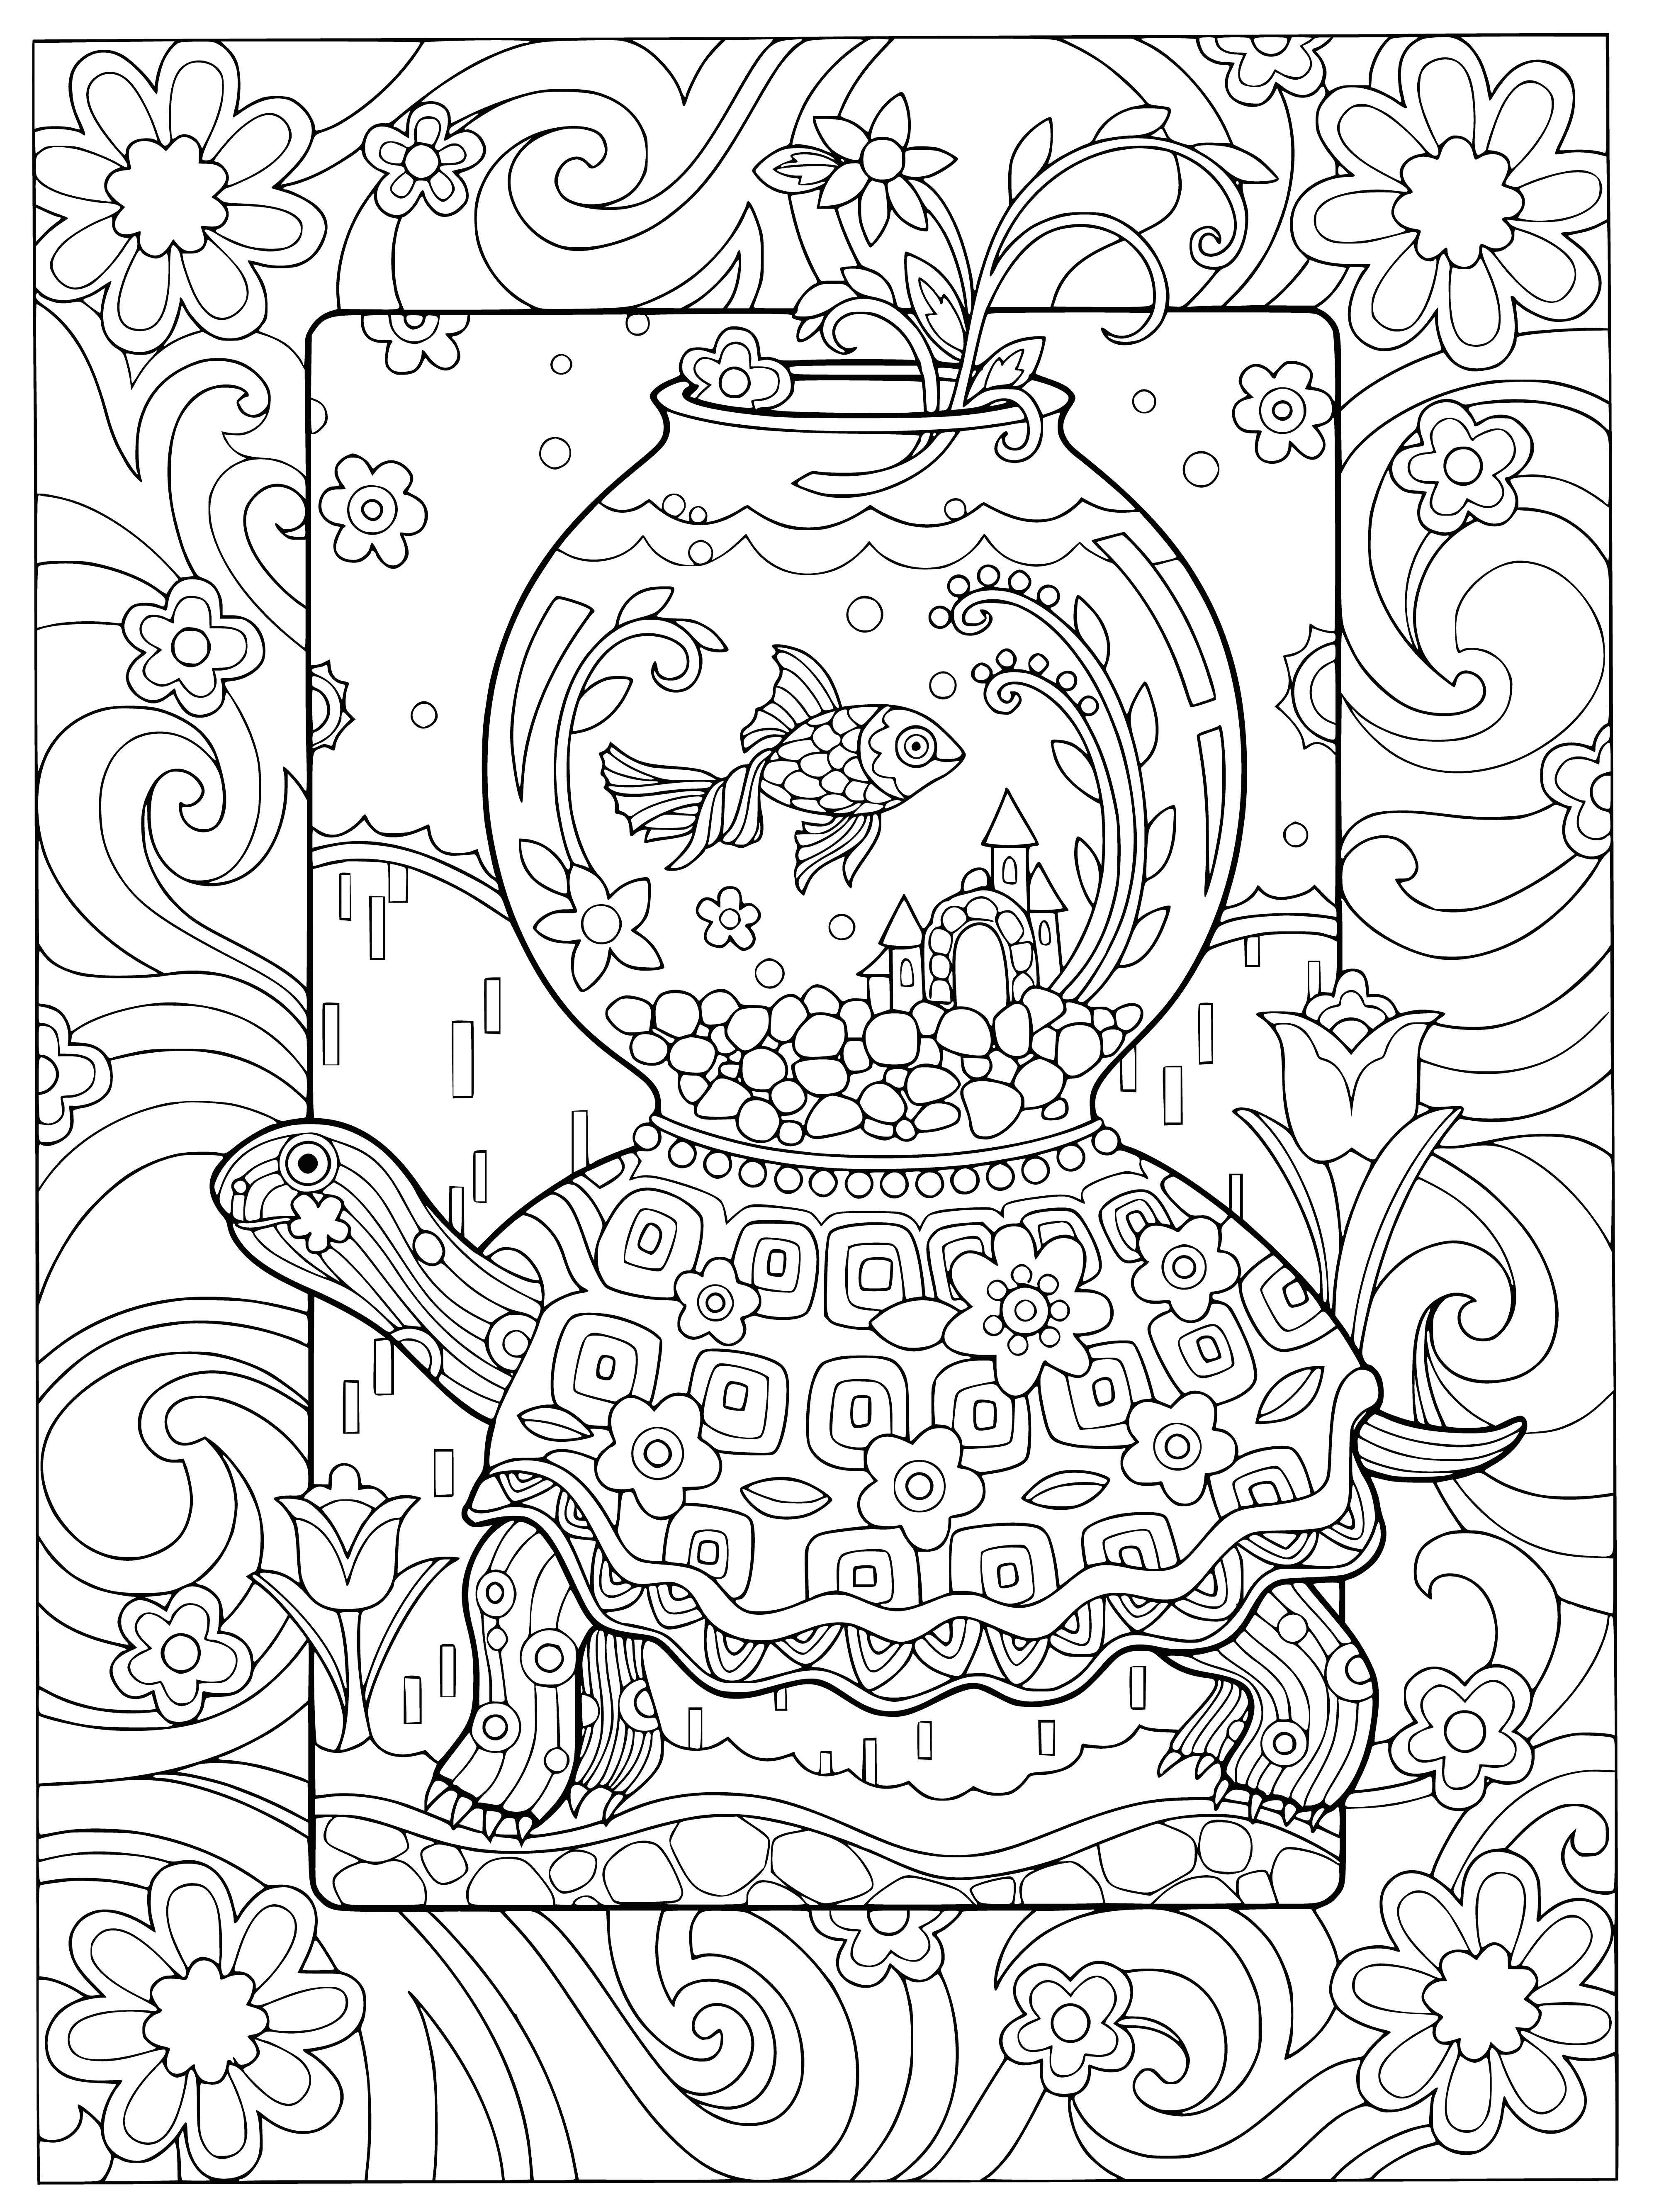 coloring page: A large sea turtle lazily swims, its shell a dark green with lighter flippers and its body covered in swirls & dots. Its underbelly creamy white, eyes closed with a peaceful expression.